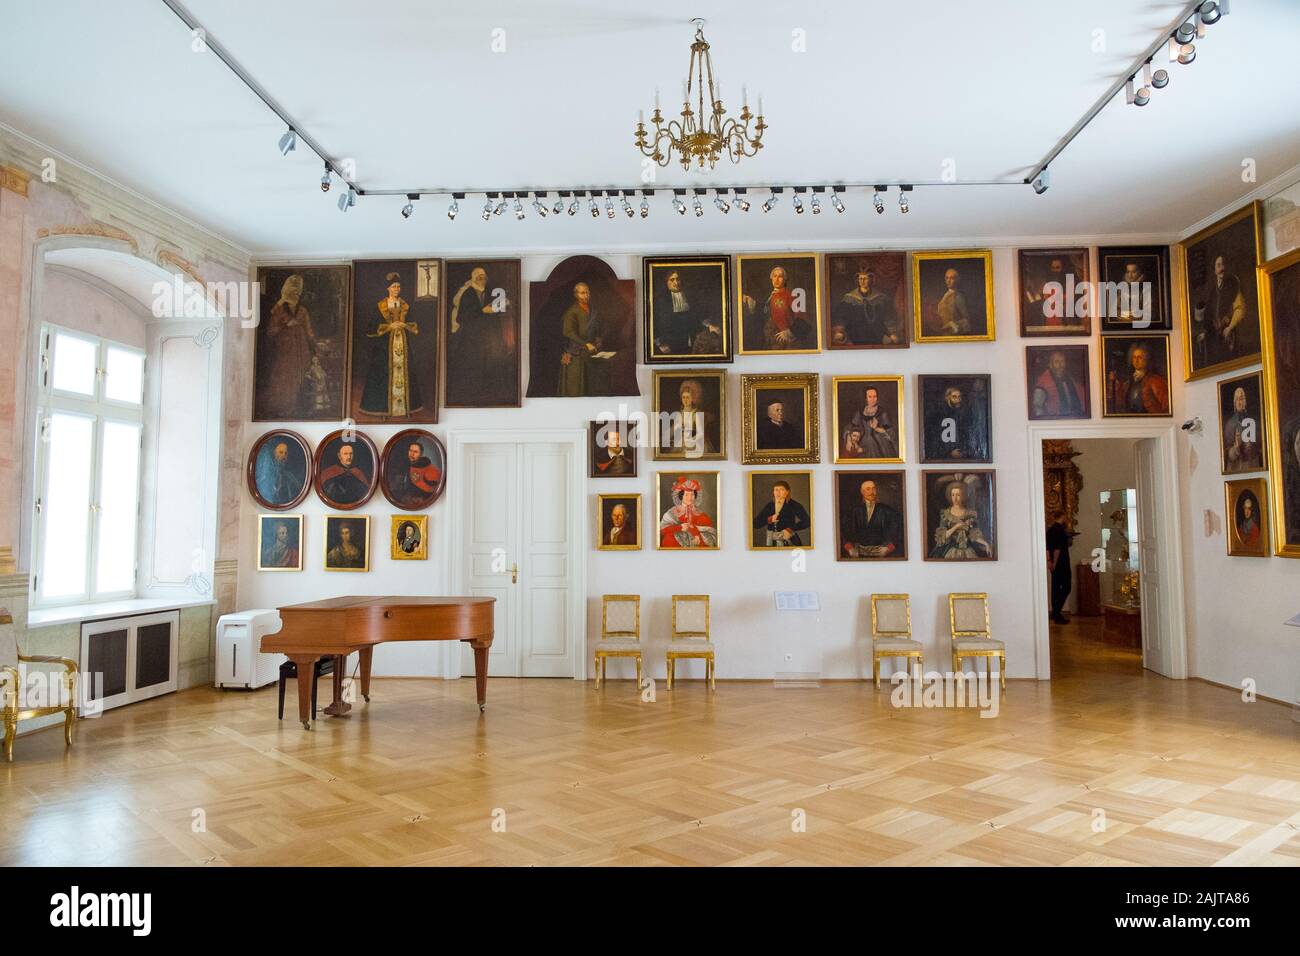 Paintings of Polish nobility in a room at the Bishop's Palace, Kraków, Poland Stock Photo